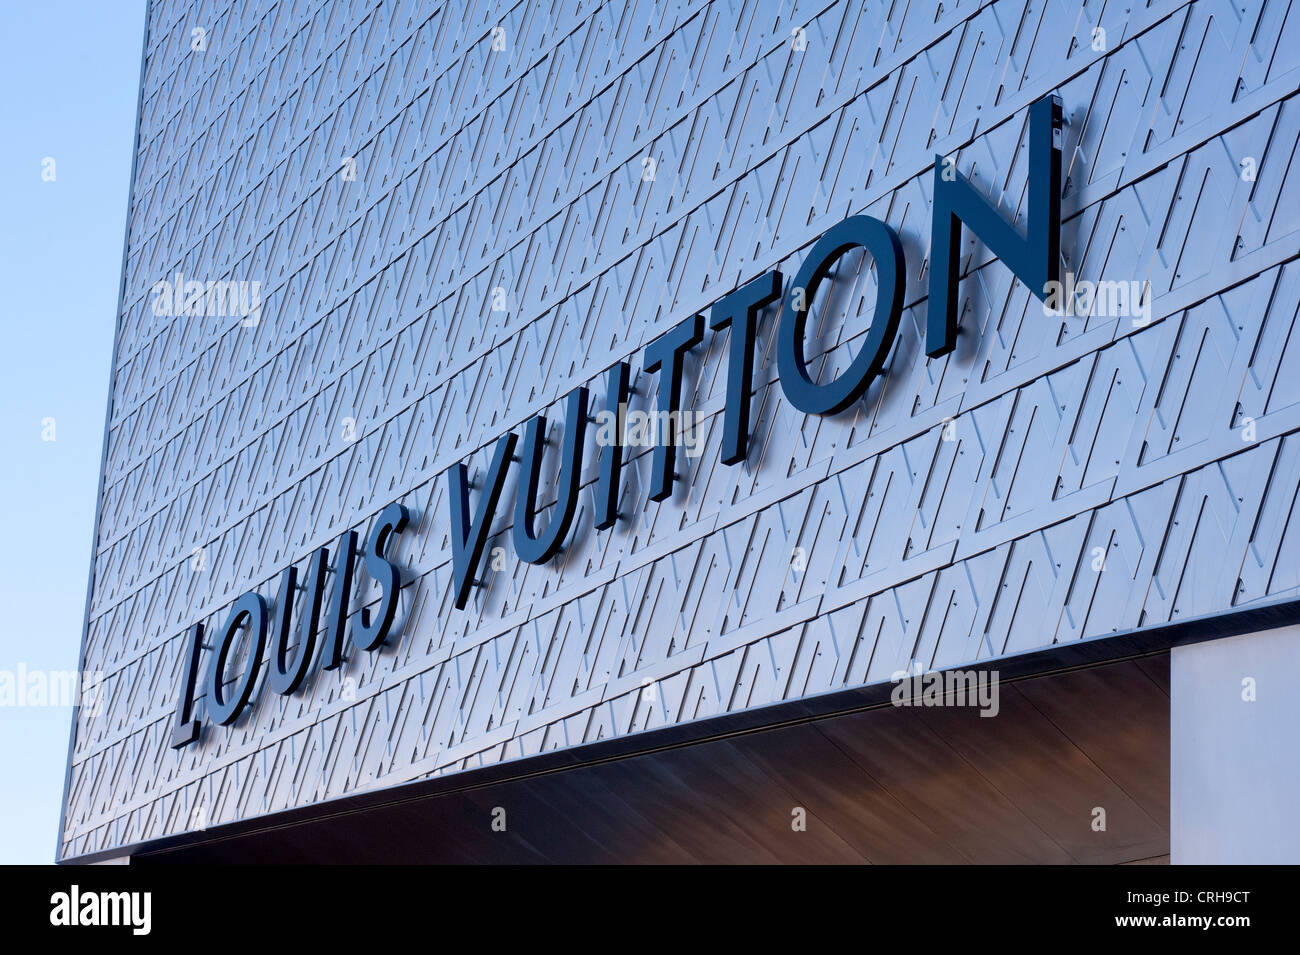 Louis Vuitton sign at the City Centre Complex in Las Vegas, Nevada Stock Photo: 48938424 - Alamy